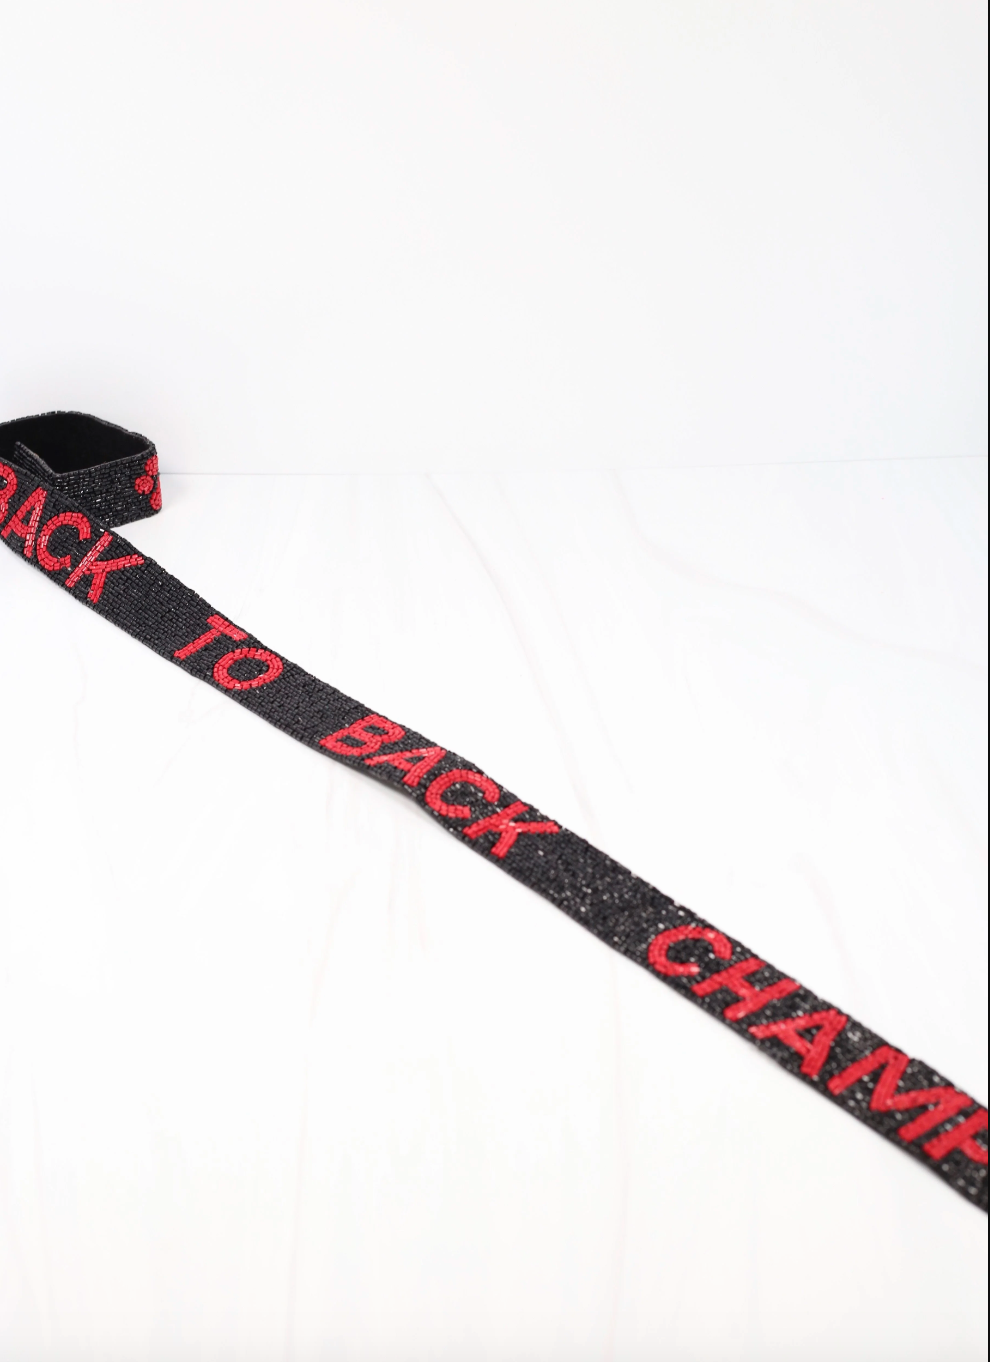 Back To Back Champs Strap (2 Colors)